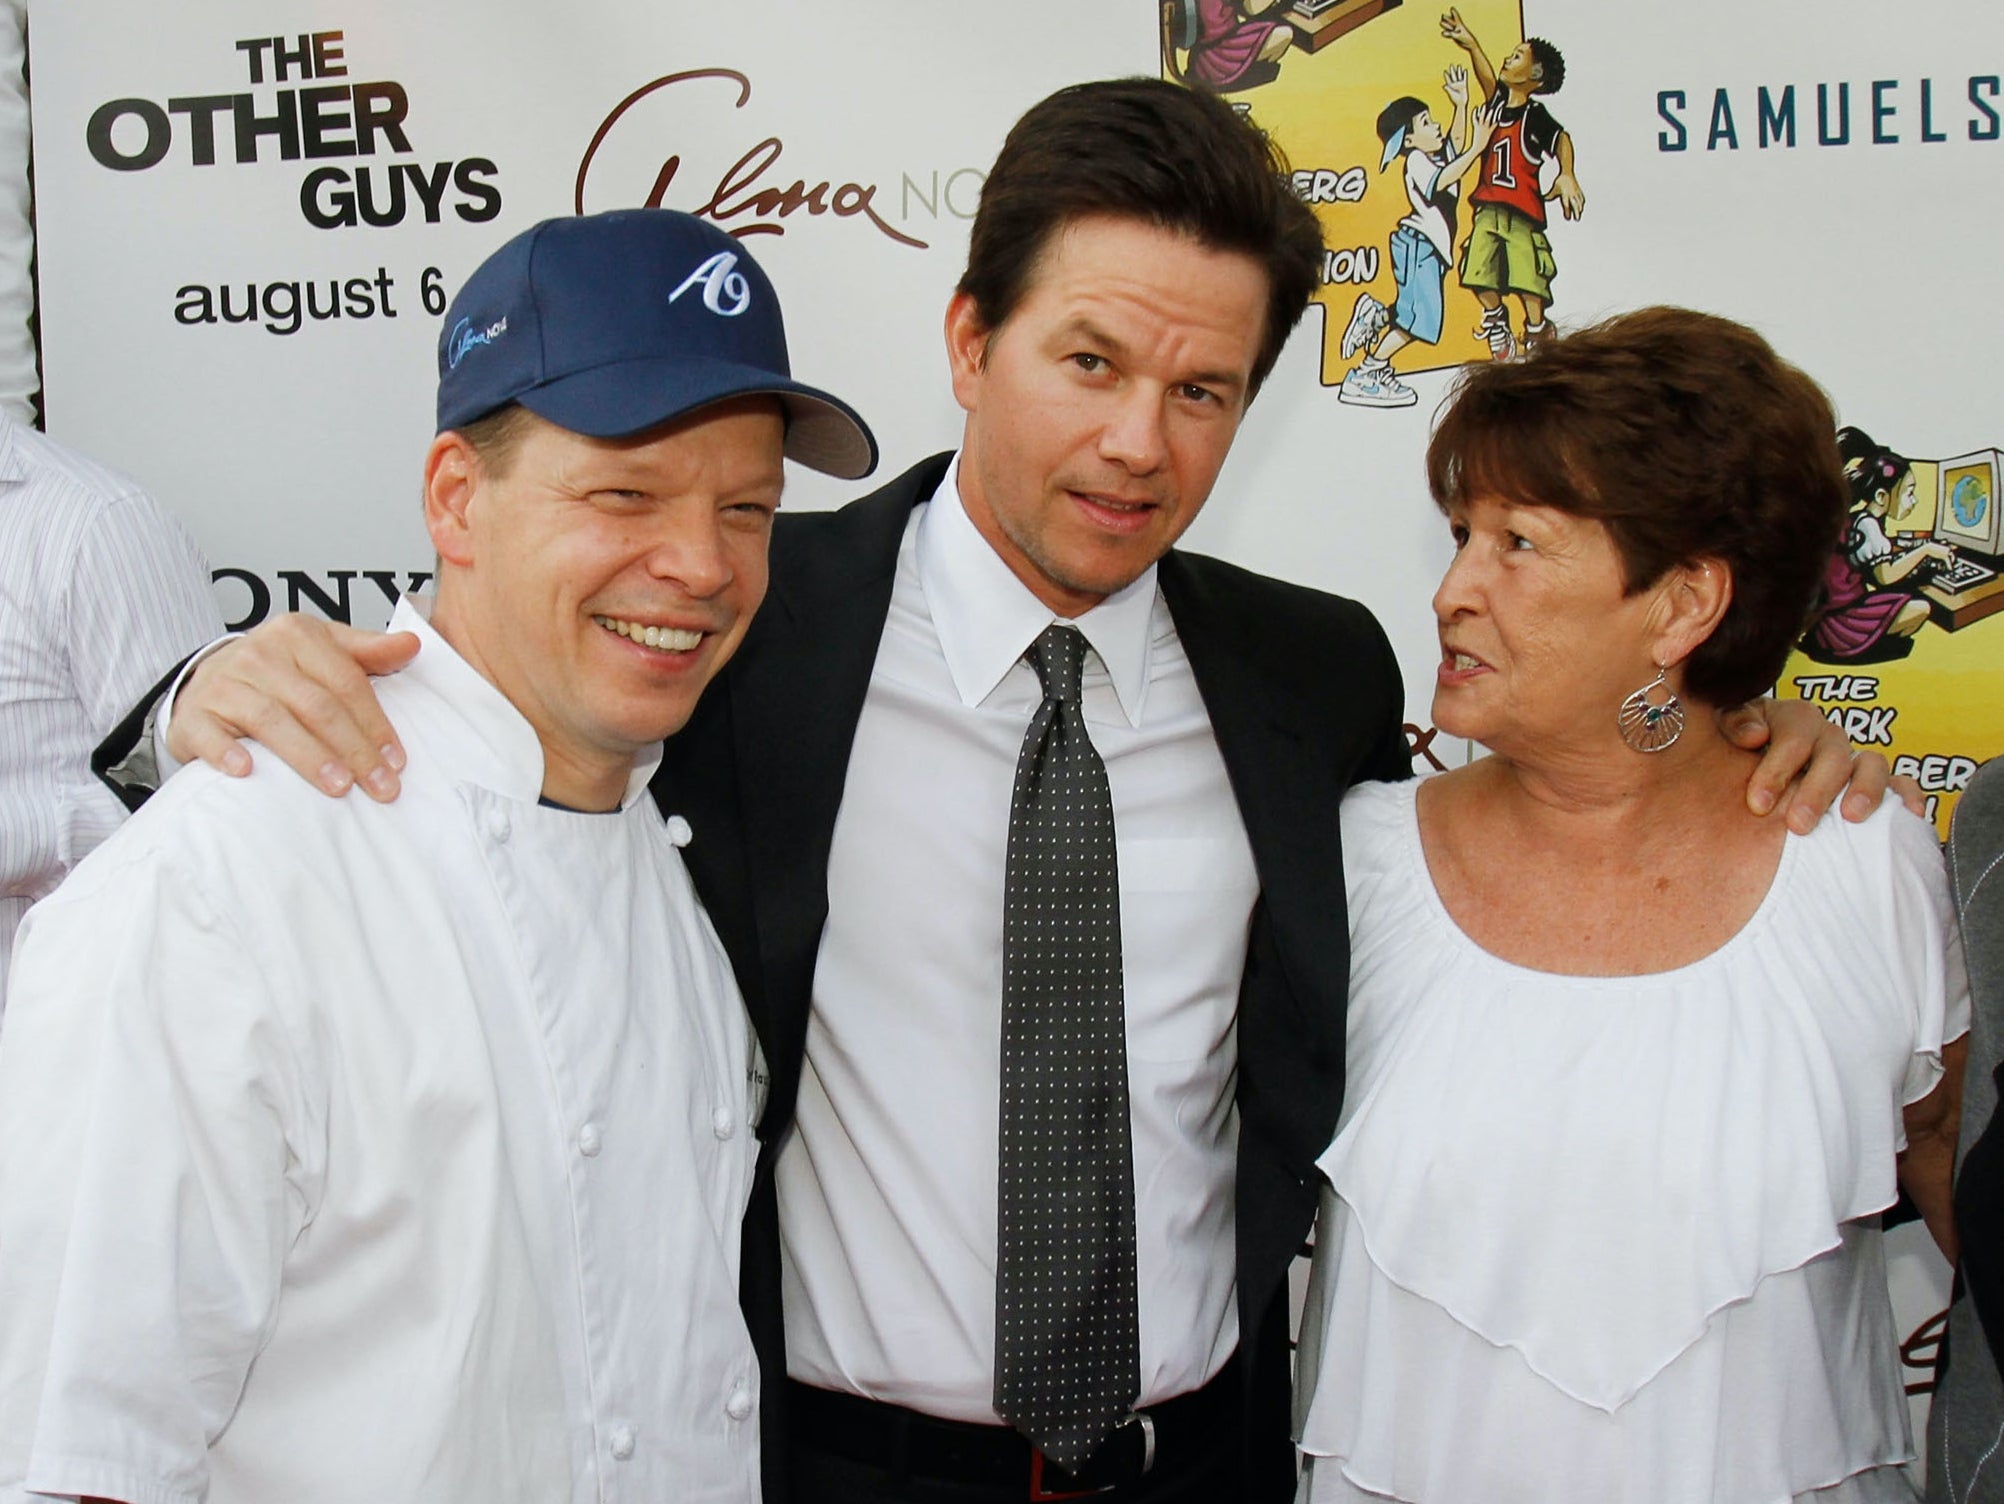 Brothers Paul and Mark Wahlberg with their mother Alma, at the premiere of Mark Wahlberg’s film The Other Guys